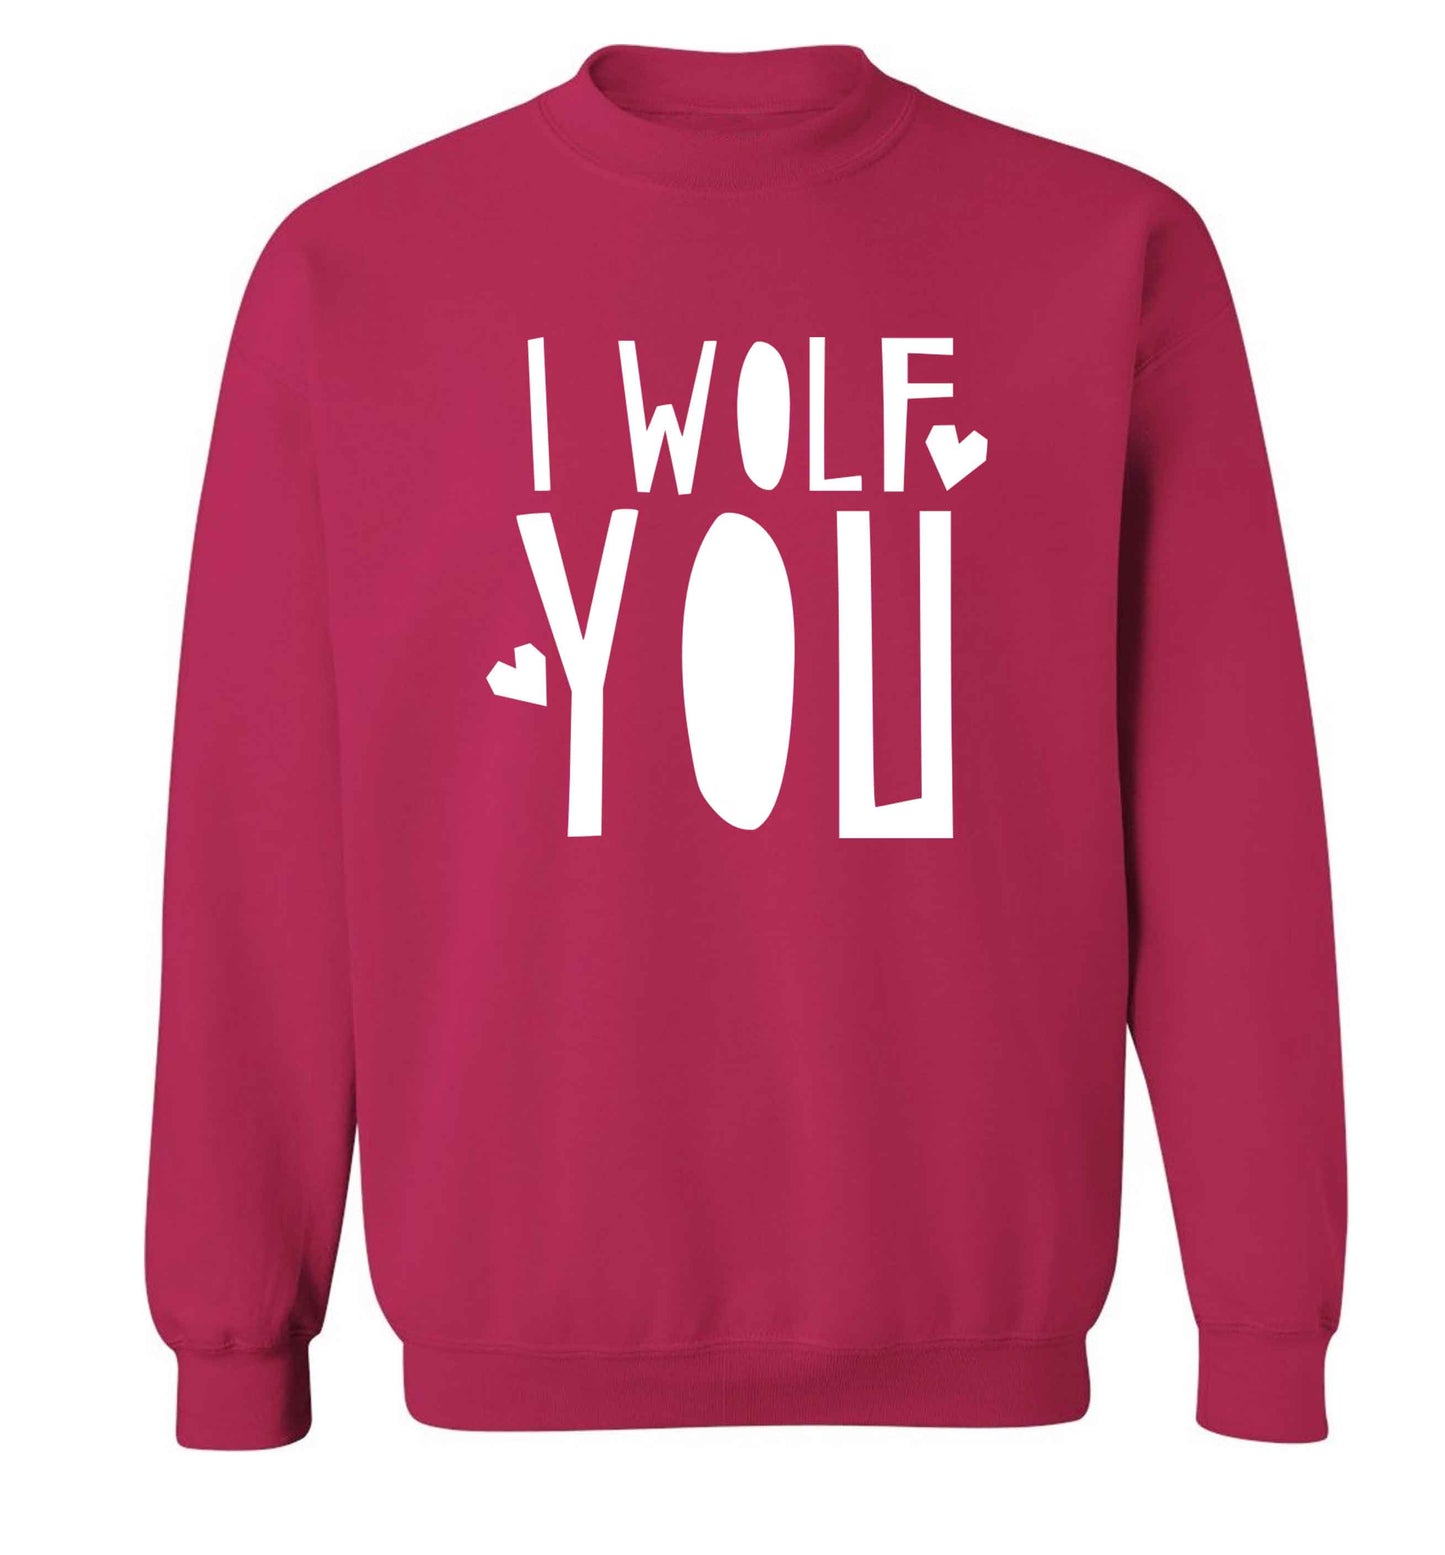 I wolf you adult's unisex pink sweater 2XL